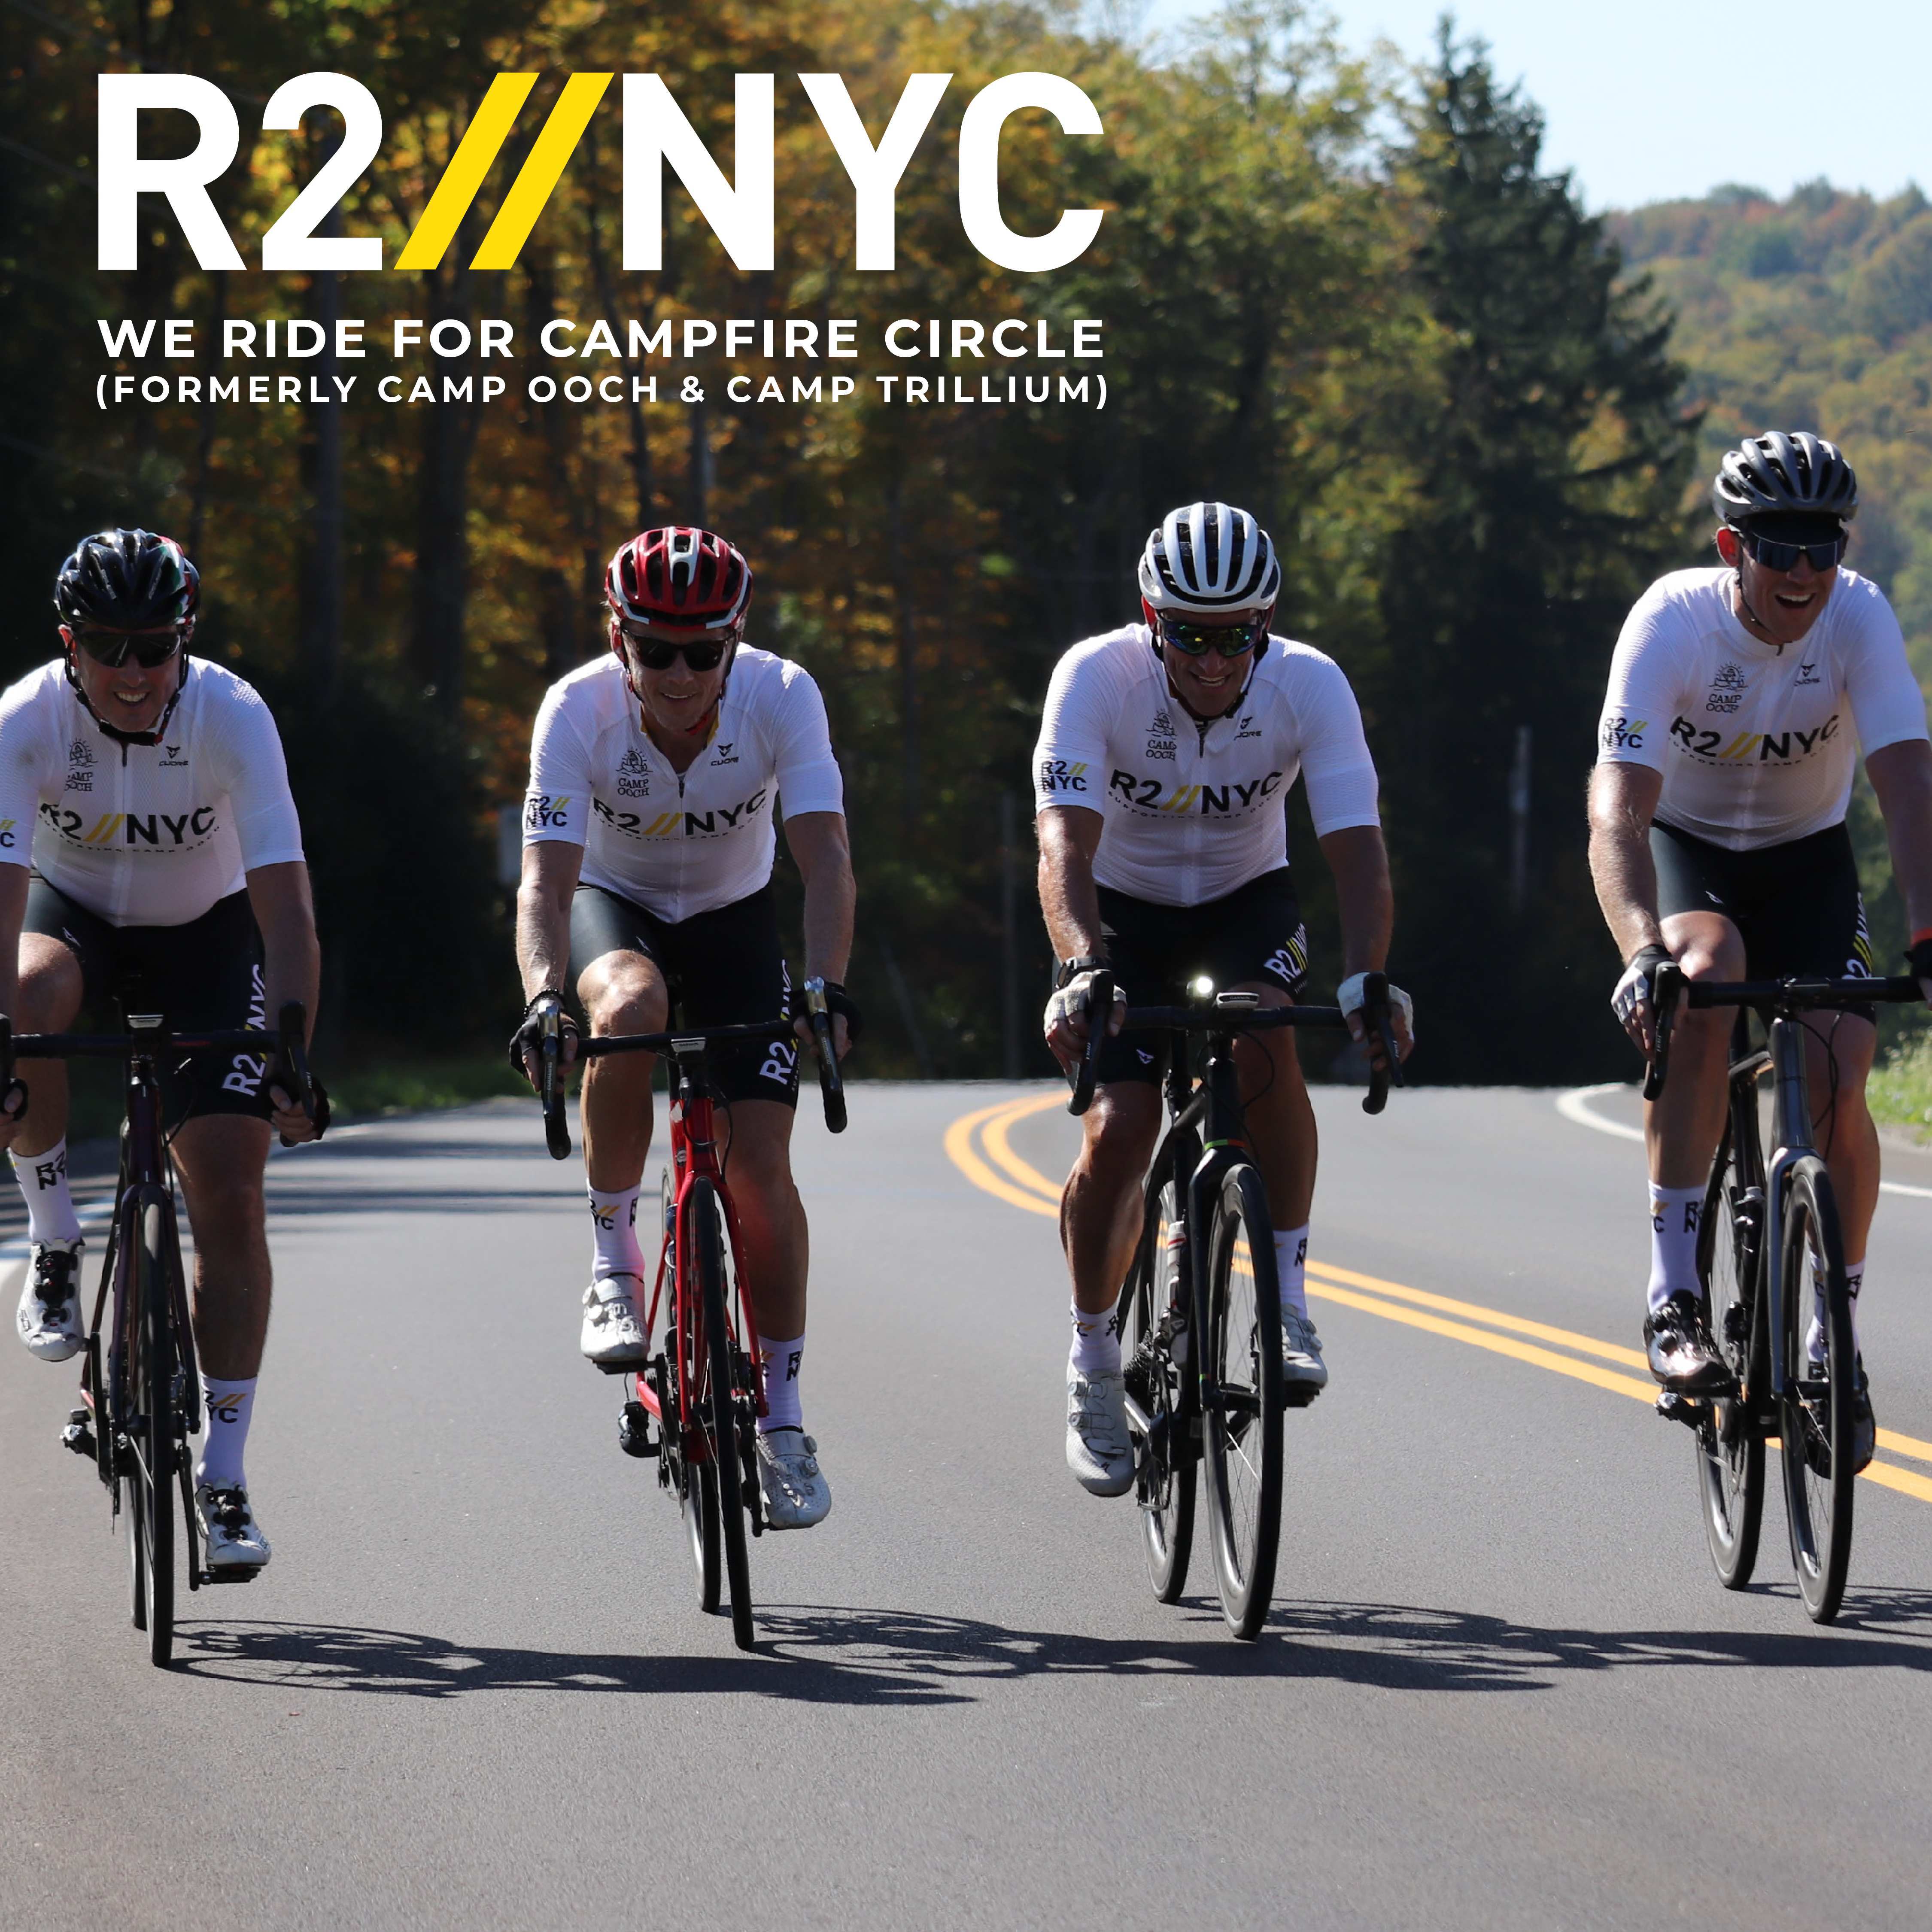 R2NYC We ride for Campfire Circle (Formerly Camp Ooch & Camp Trillium) Four riders on bikes on road with big trees in background